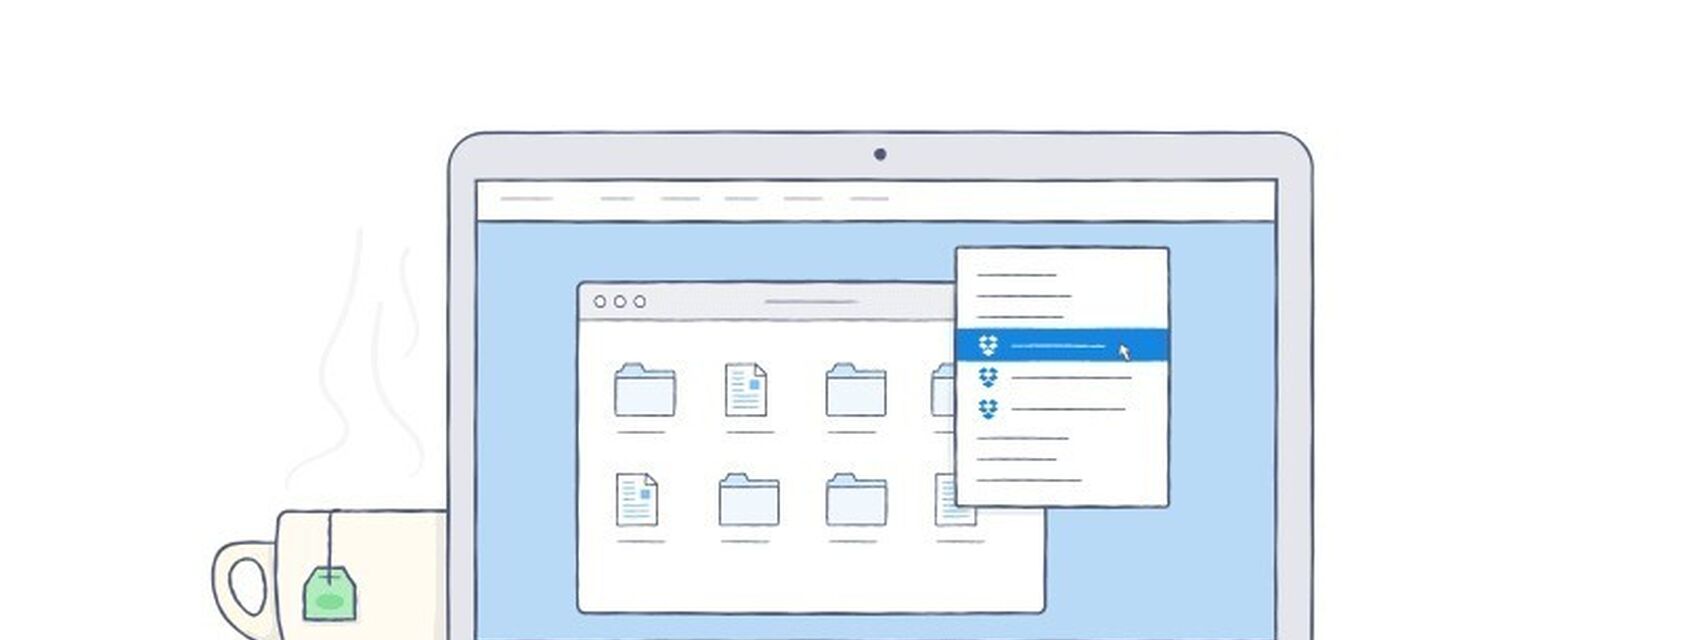 Dropbox now allows links with password and expiration, and offers 1 TB for € 9.99 / month